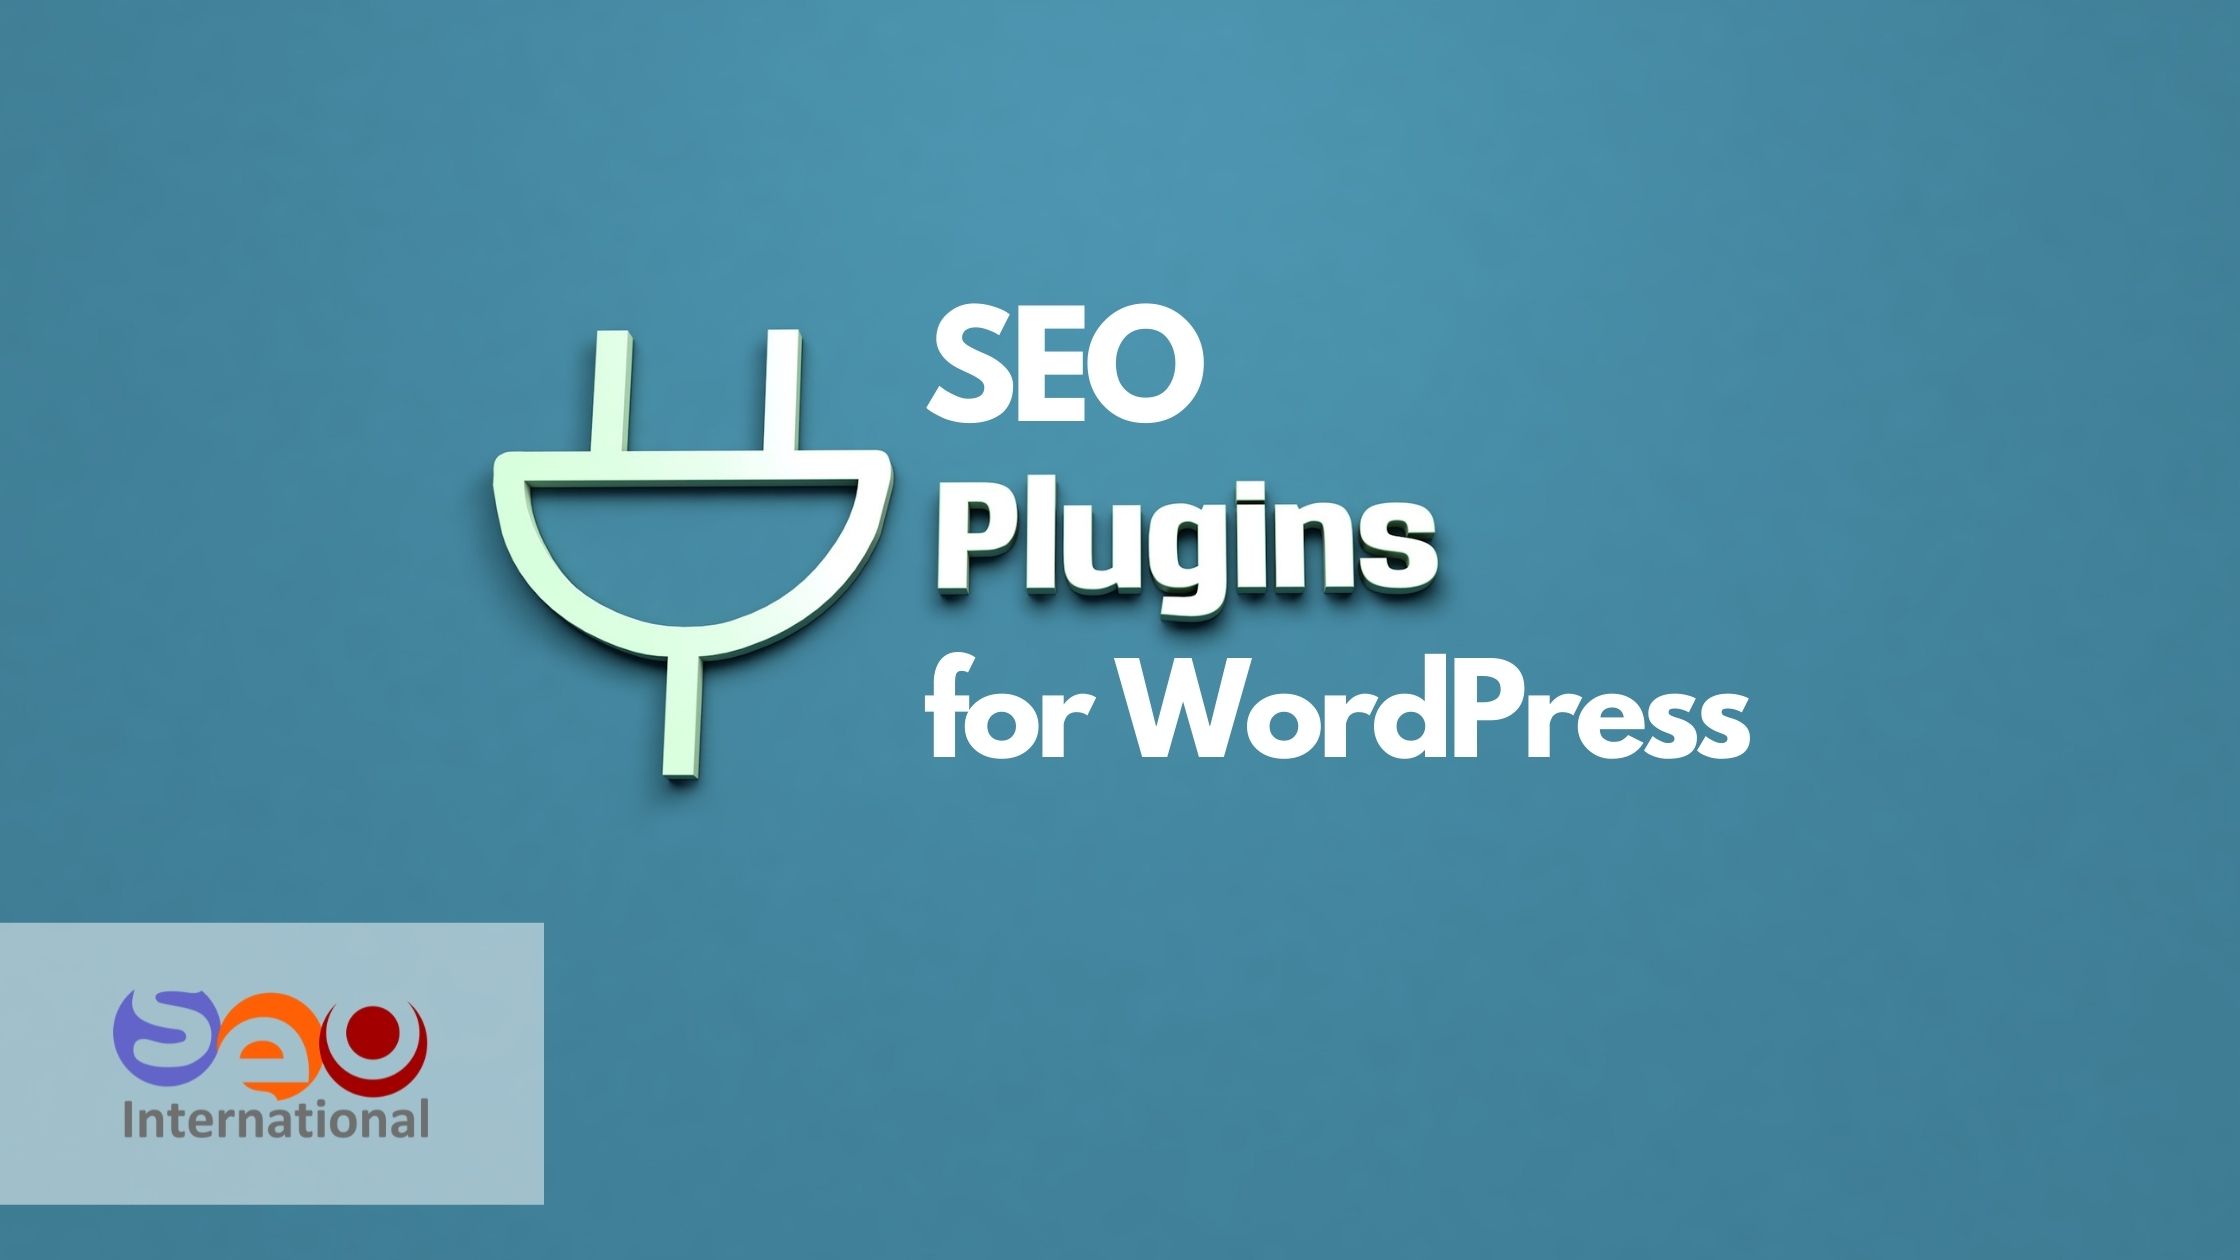 10 Recommended SEO Plugins for WordPress